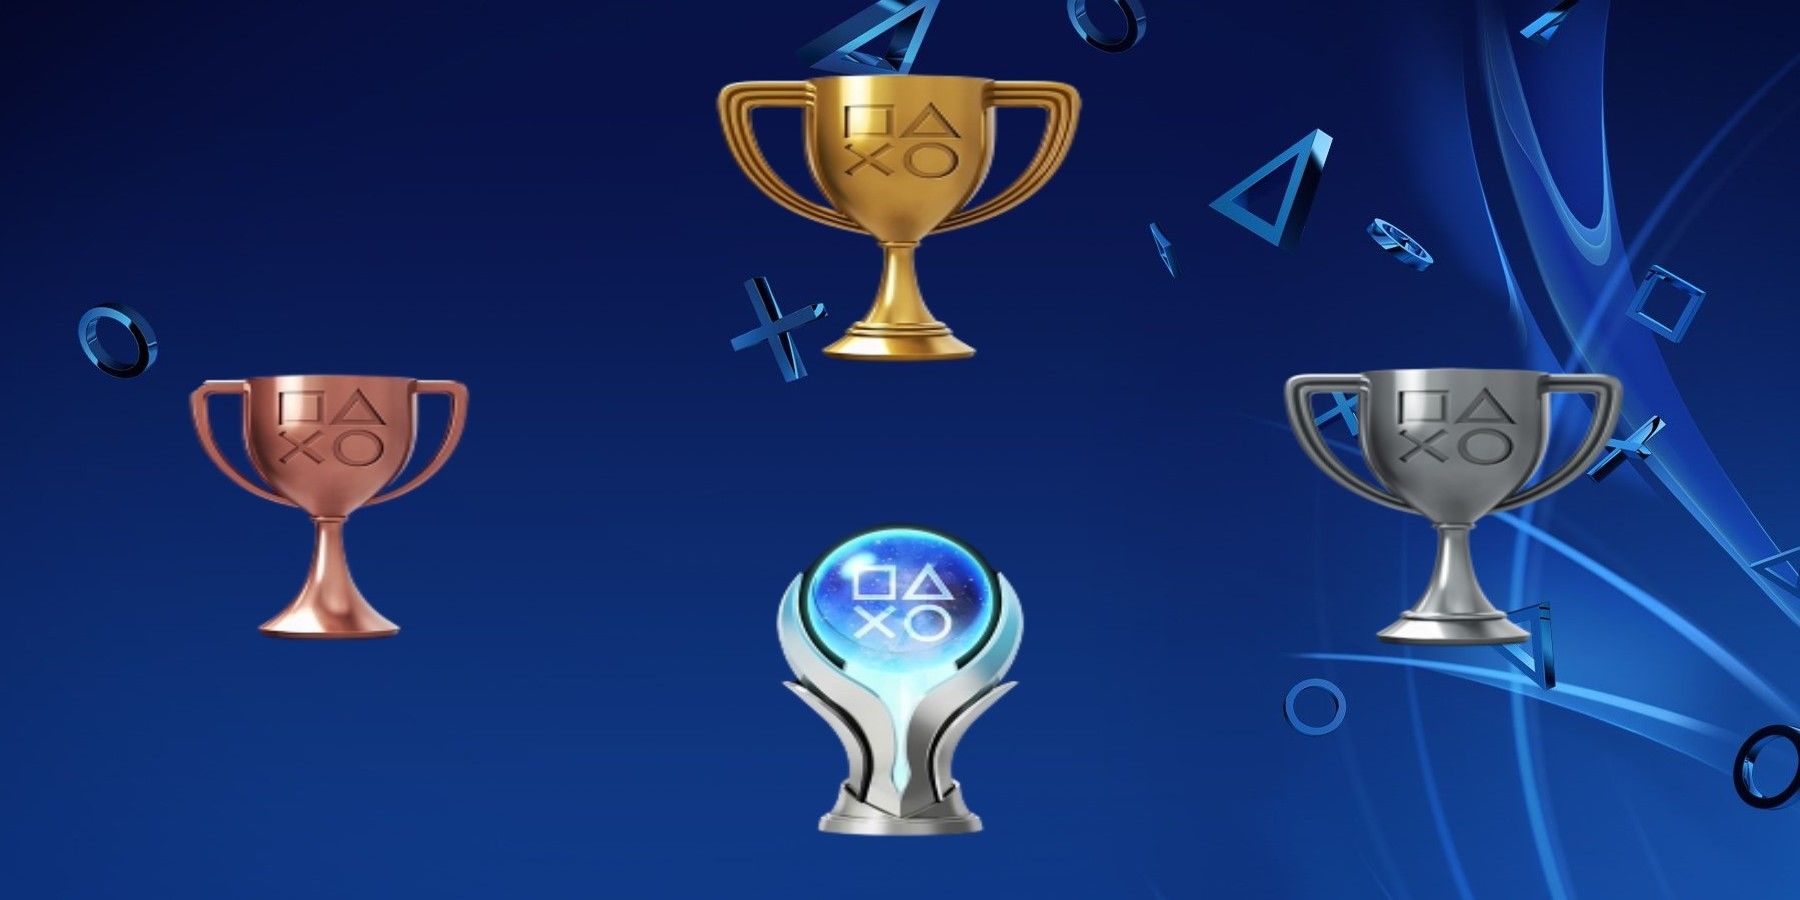 New PlayStation 4 Trophy Levels Being Introduced Today - Siliconera